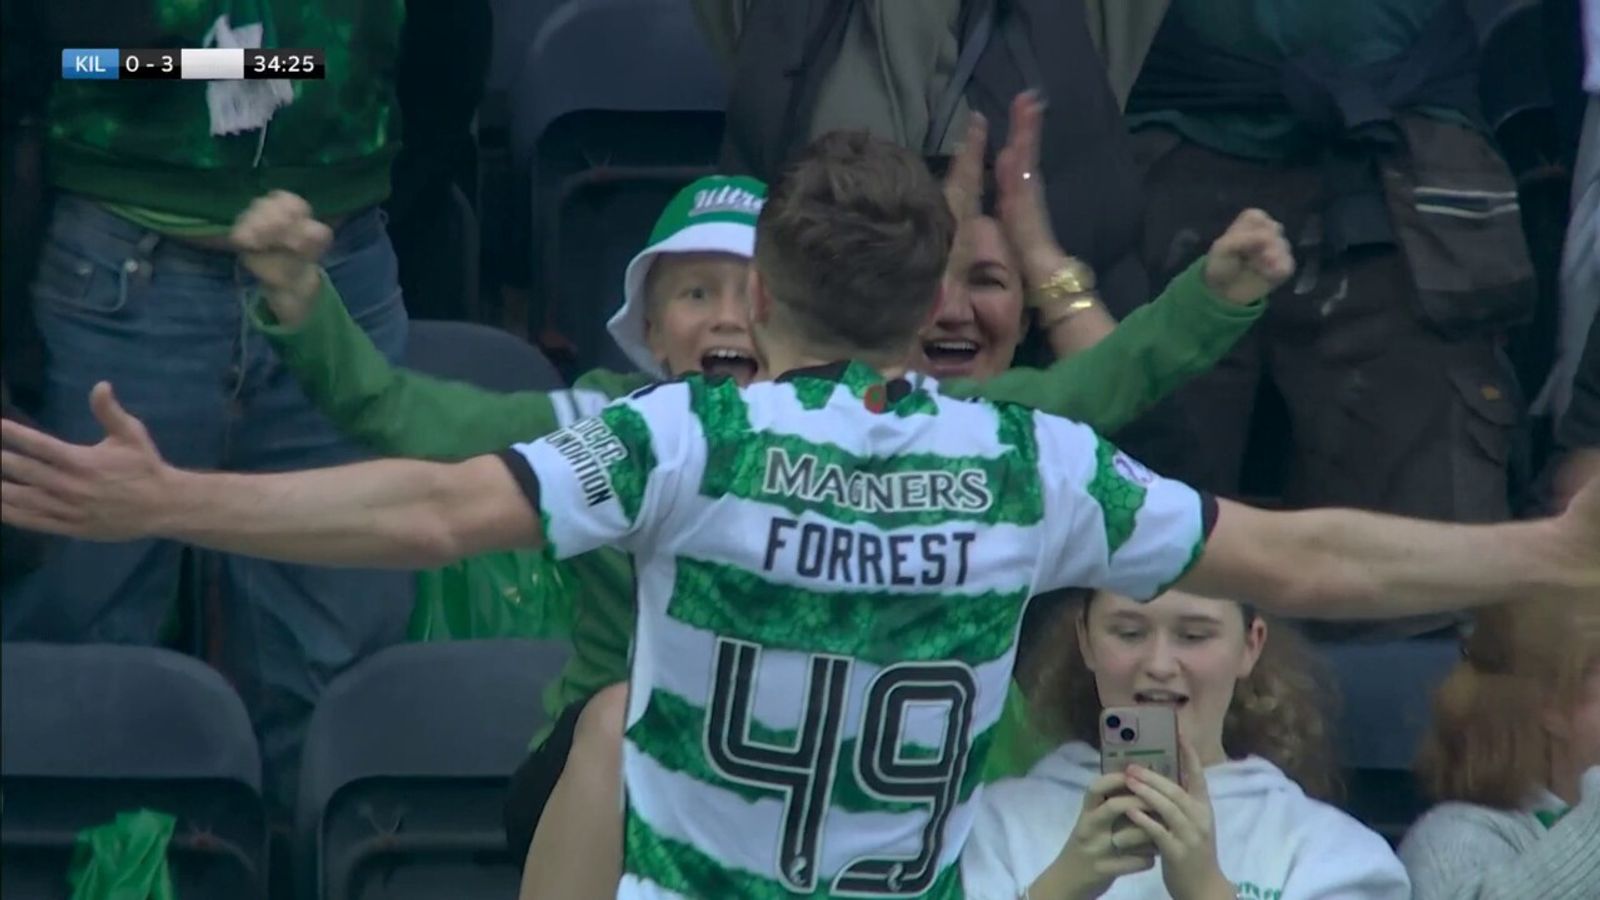 'Forrest rolling back the years!' | Clinical Celtic go 3-0 up at Rugby Park